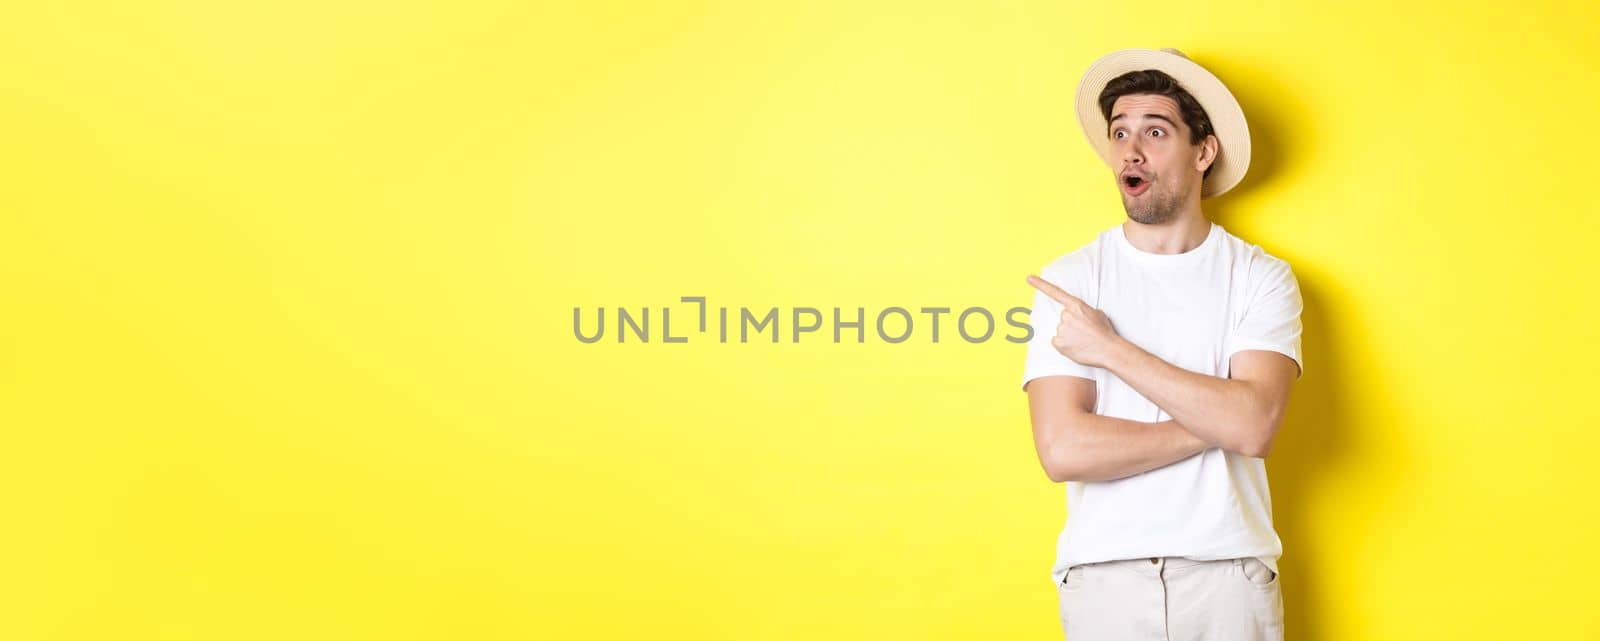 Concept of tourism and lifestyle. Excited handsome guy in straw hat checking out advertisement, pointing and looking at upper left corner logo, yellow background.